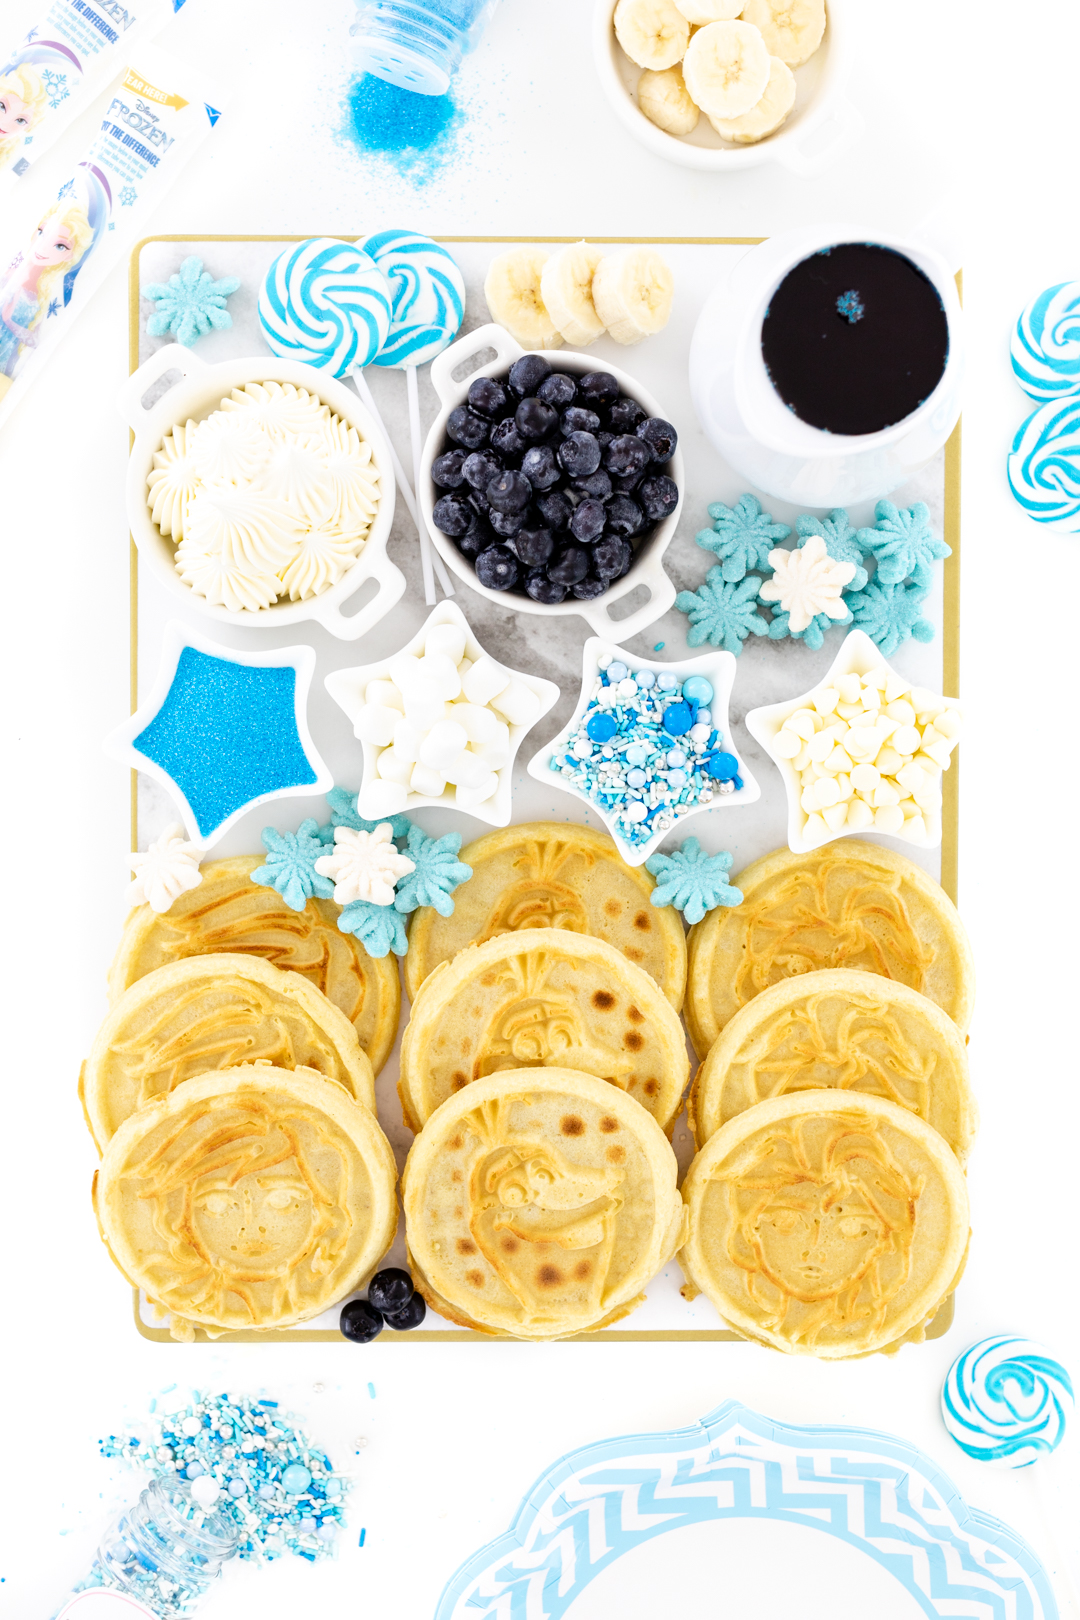 Waffle Board with fun matching sprinkles, fruits and blue syrup.